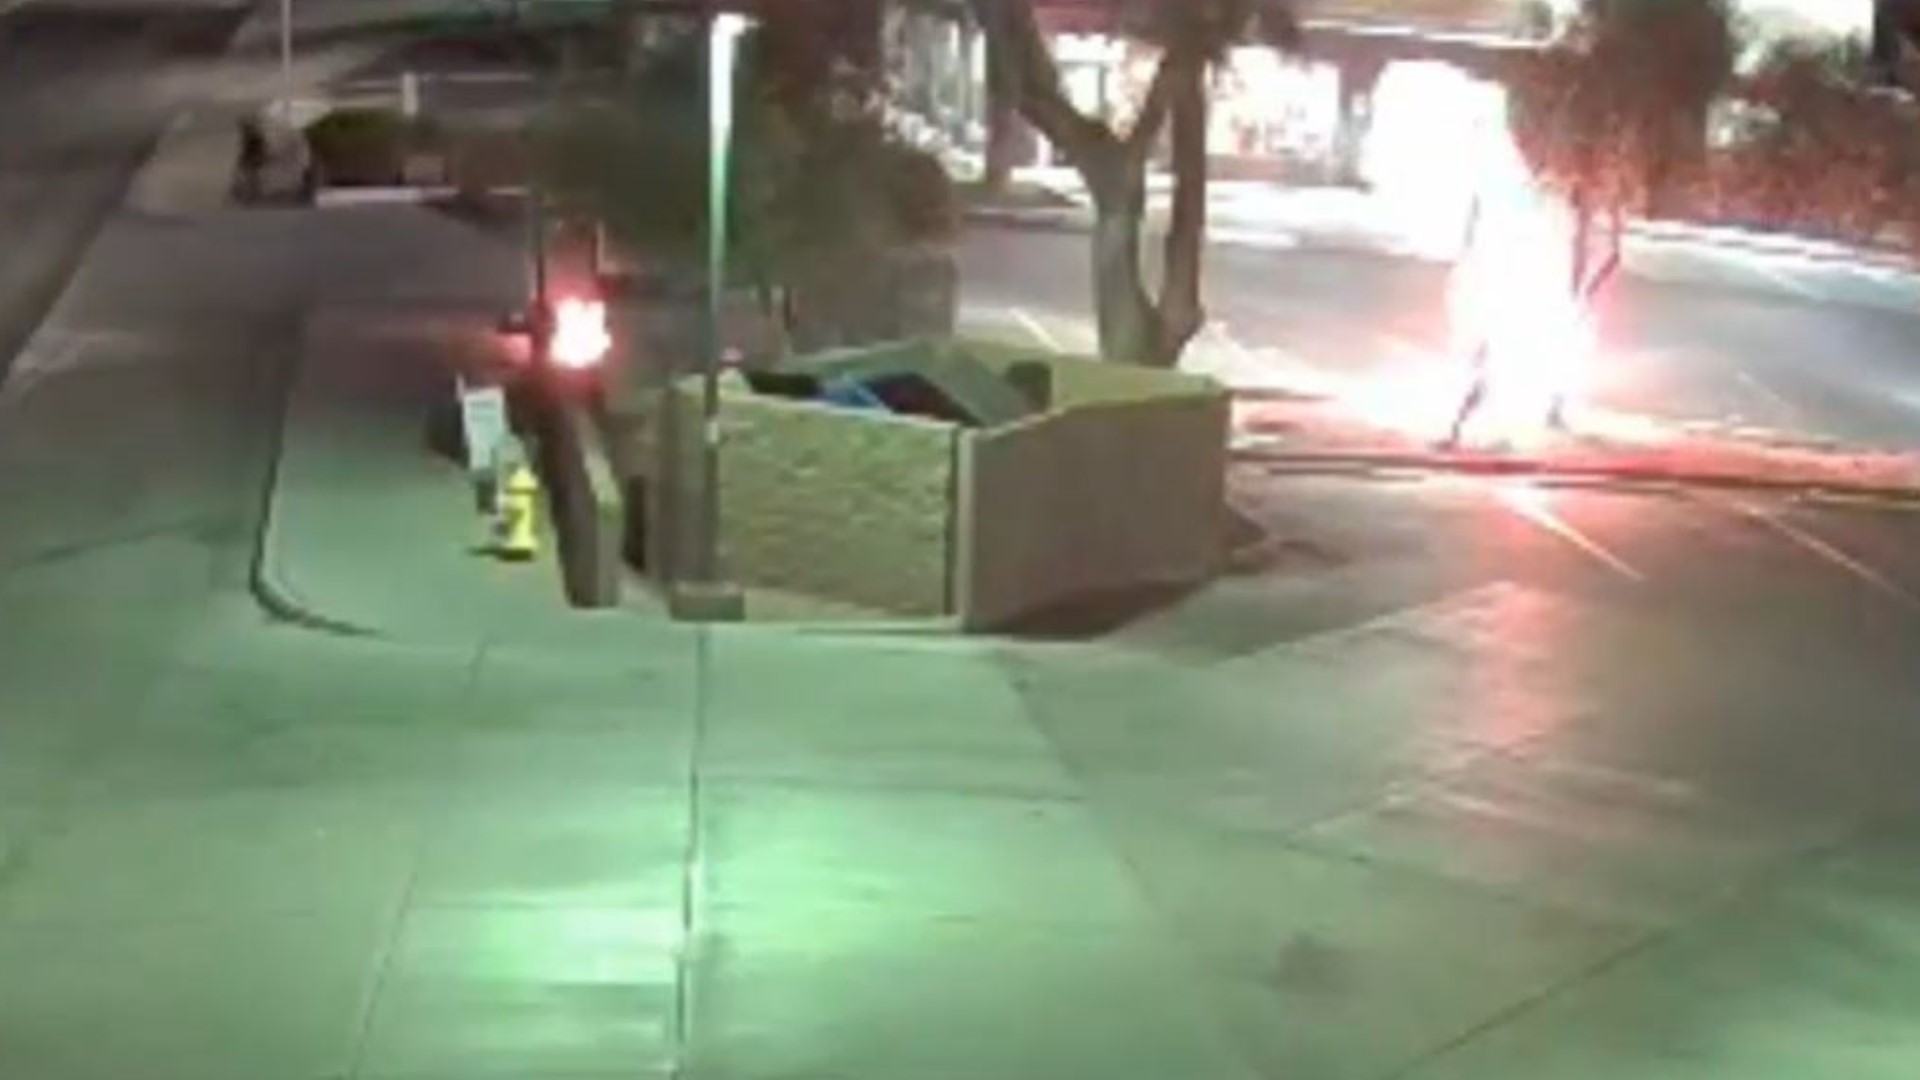 Viewer discretion advised: Street cameras captured the moment the man erupted into a ball of flames while at a bus stop.